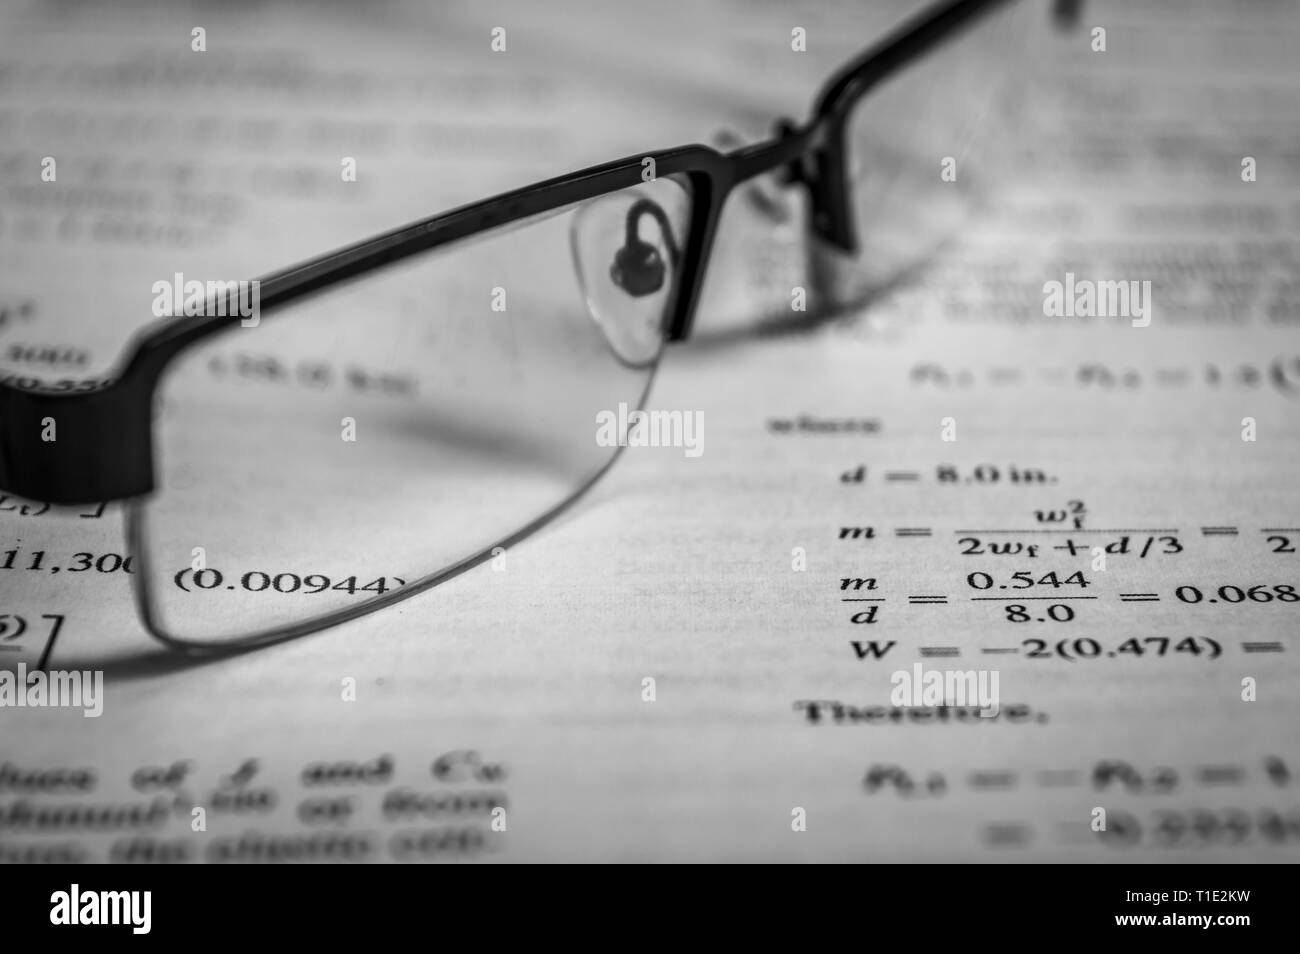 Spectacles kept on a book after reading Stock Photo